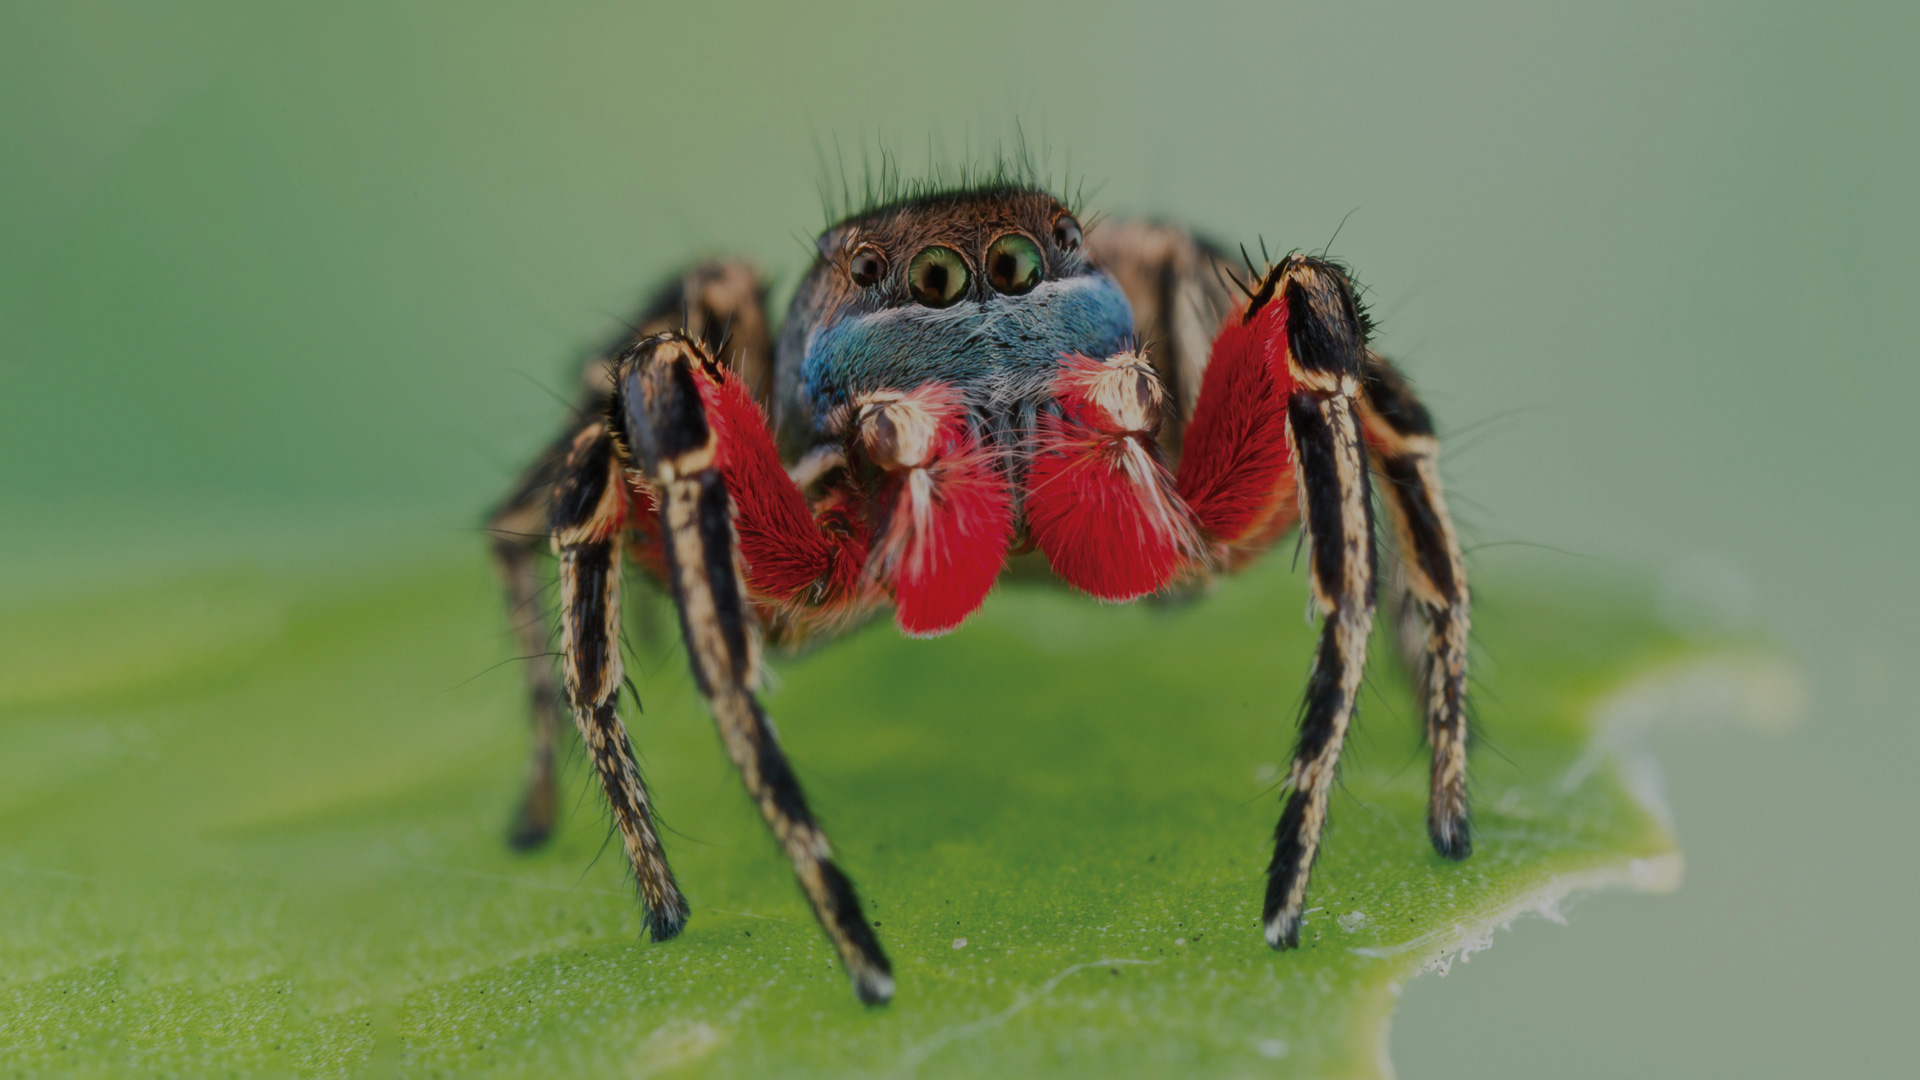 Close-up image of a jumping spider on a leaf